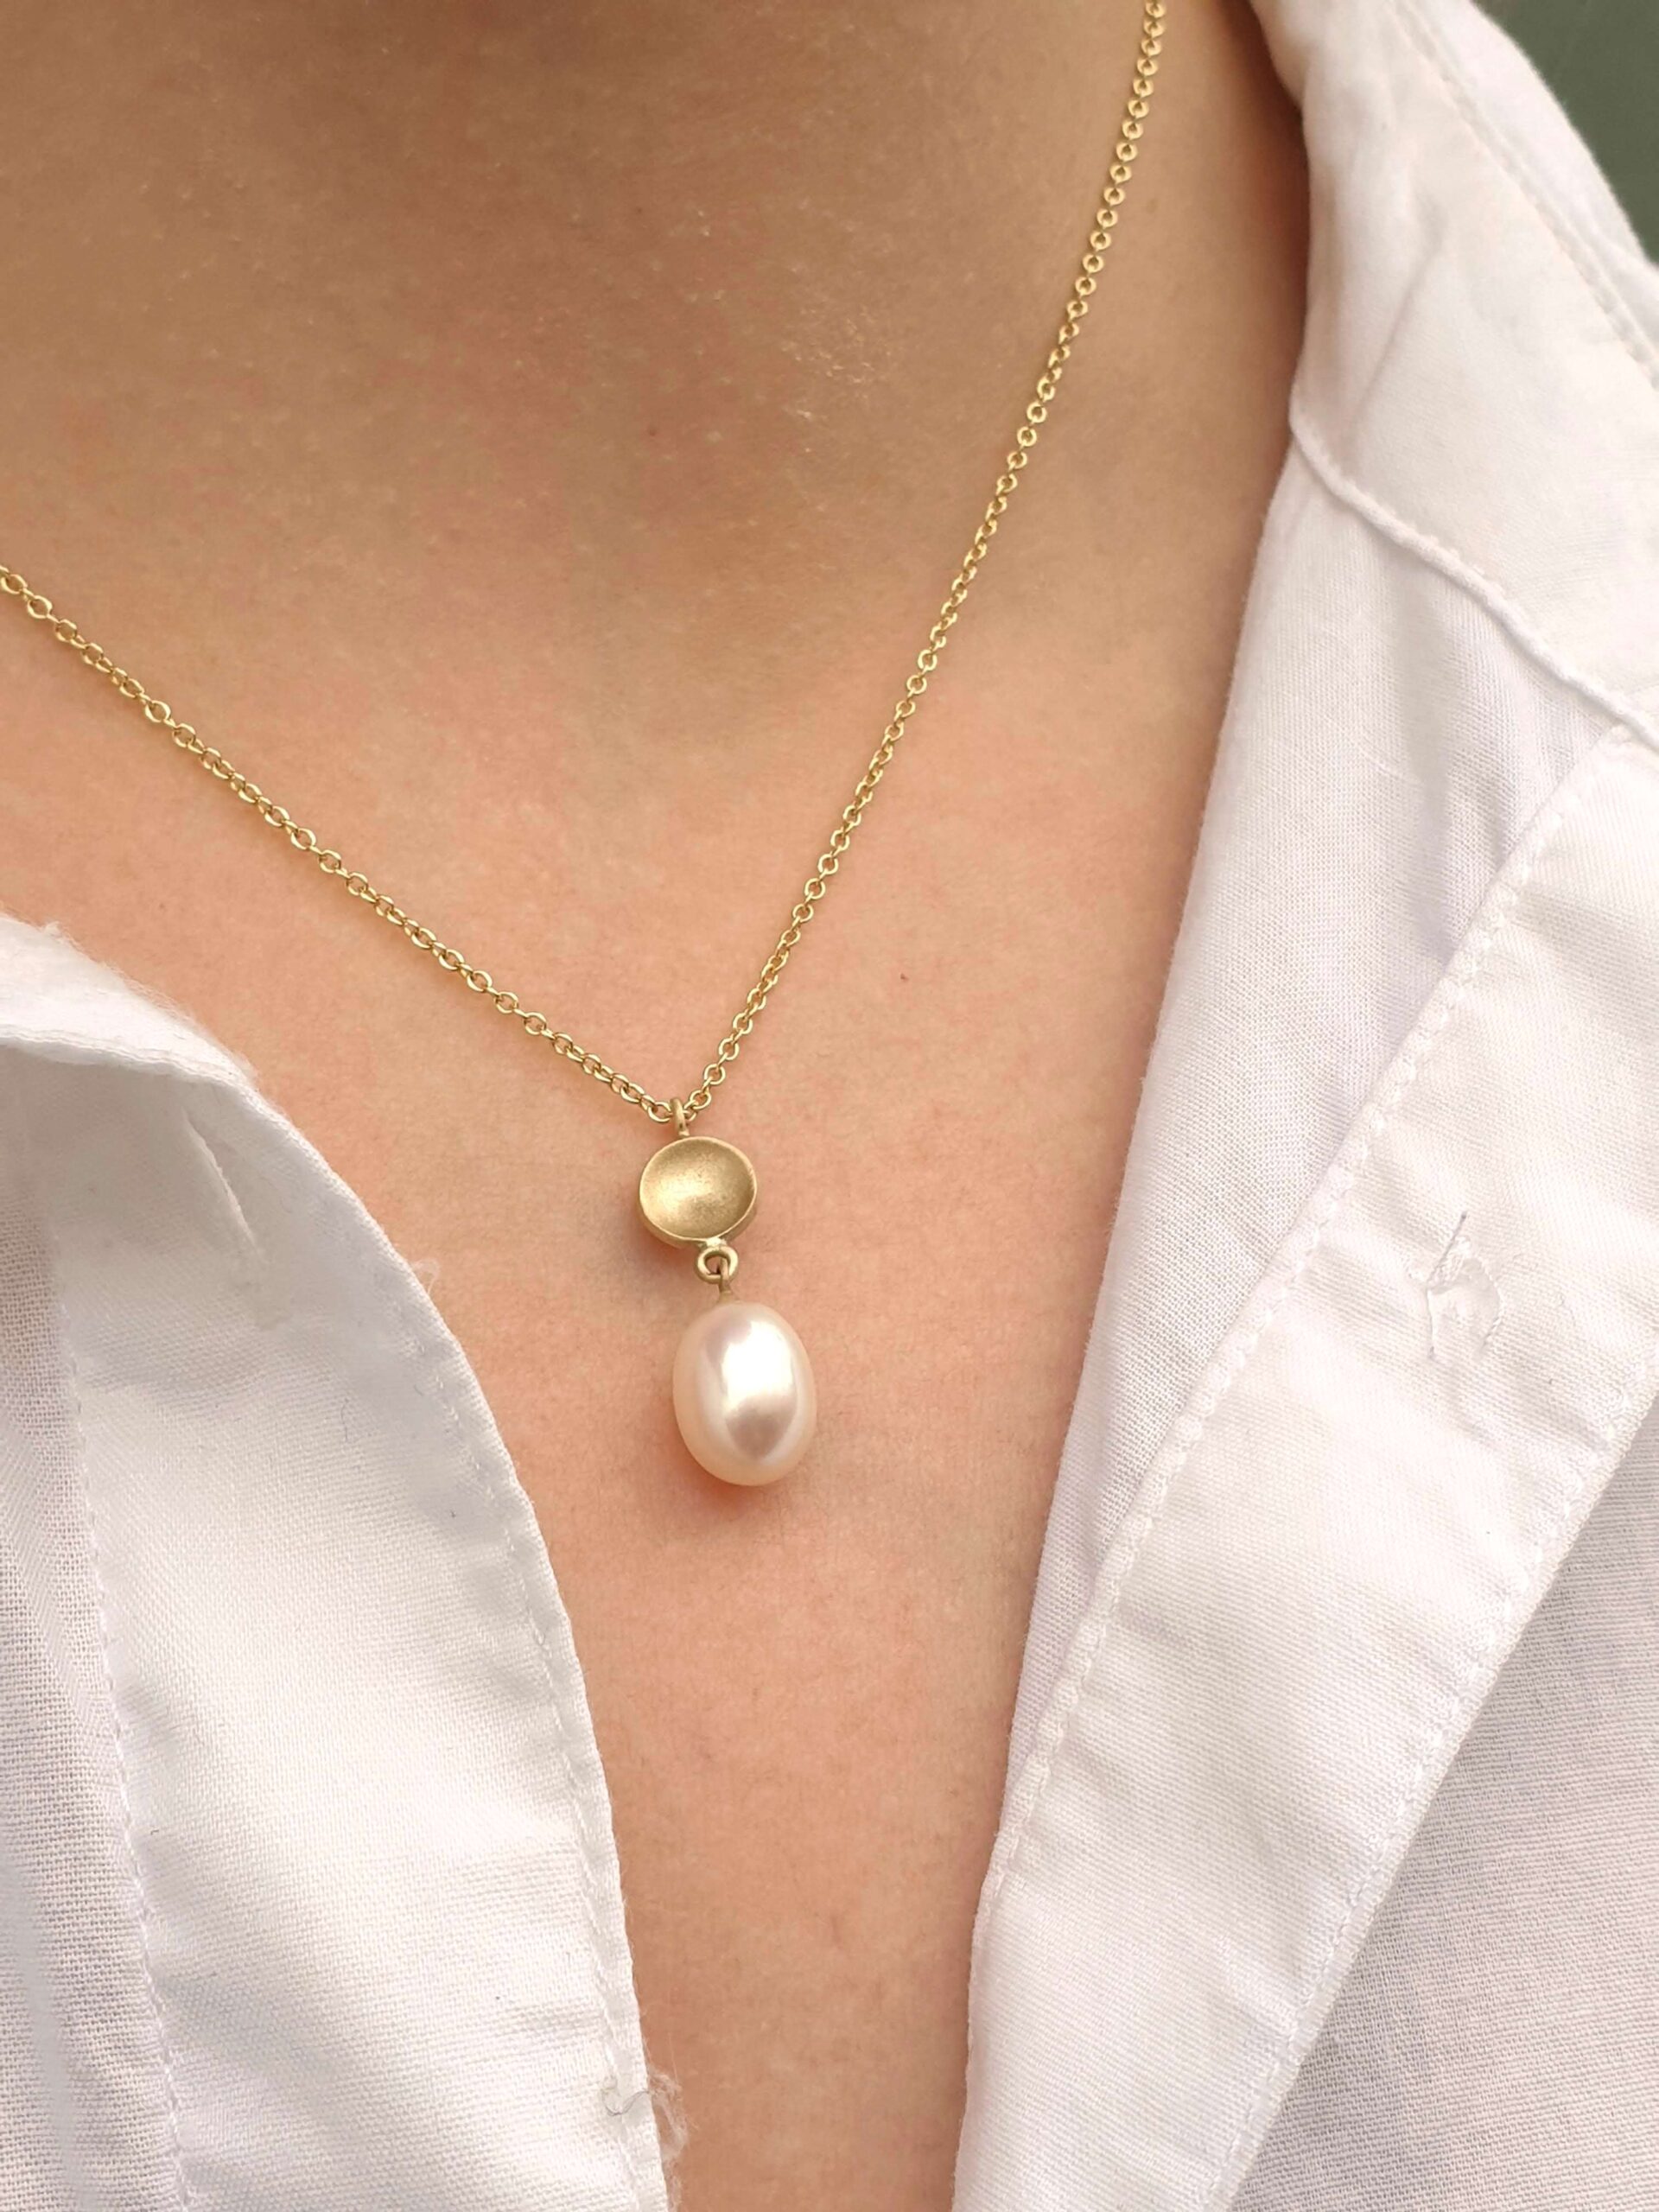 https://www.cliftonrocks.co.uk/wp-content/uploads/2022/10/Gold-Dome-Pearl-Drop-Necklace-Clifton-Rocks-Bristol-scaled-1.jpg